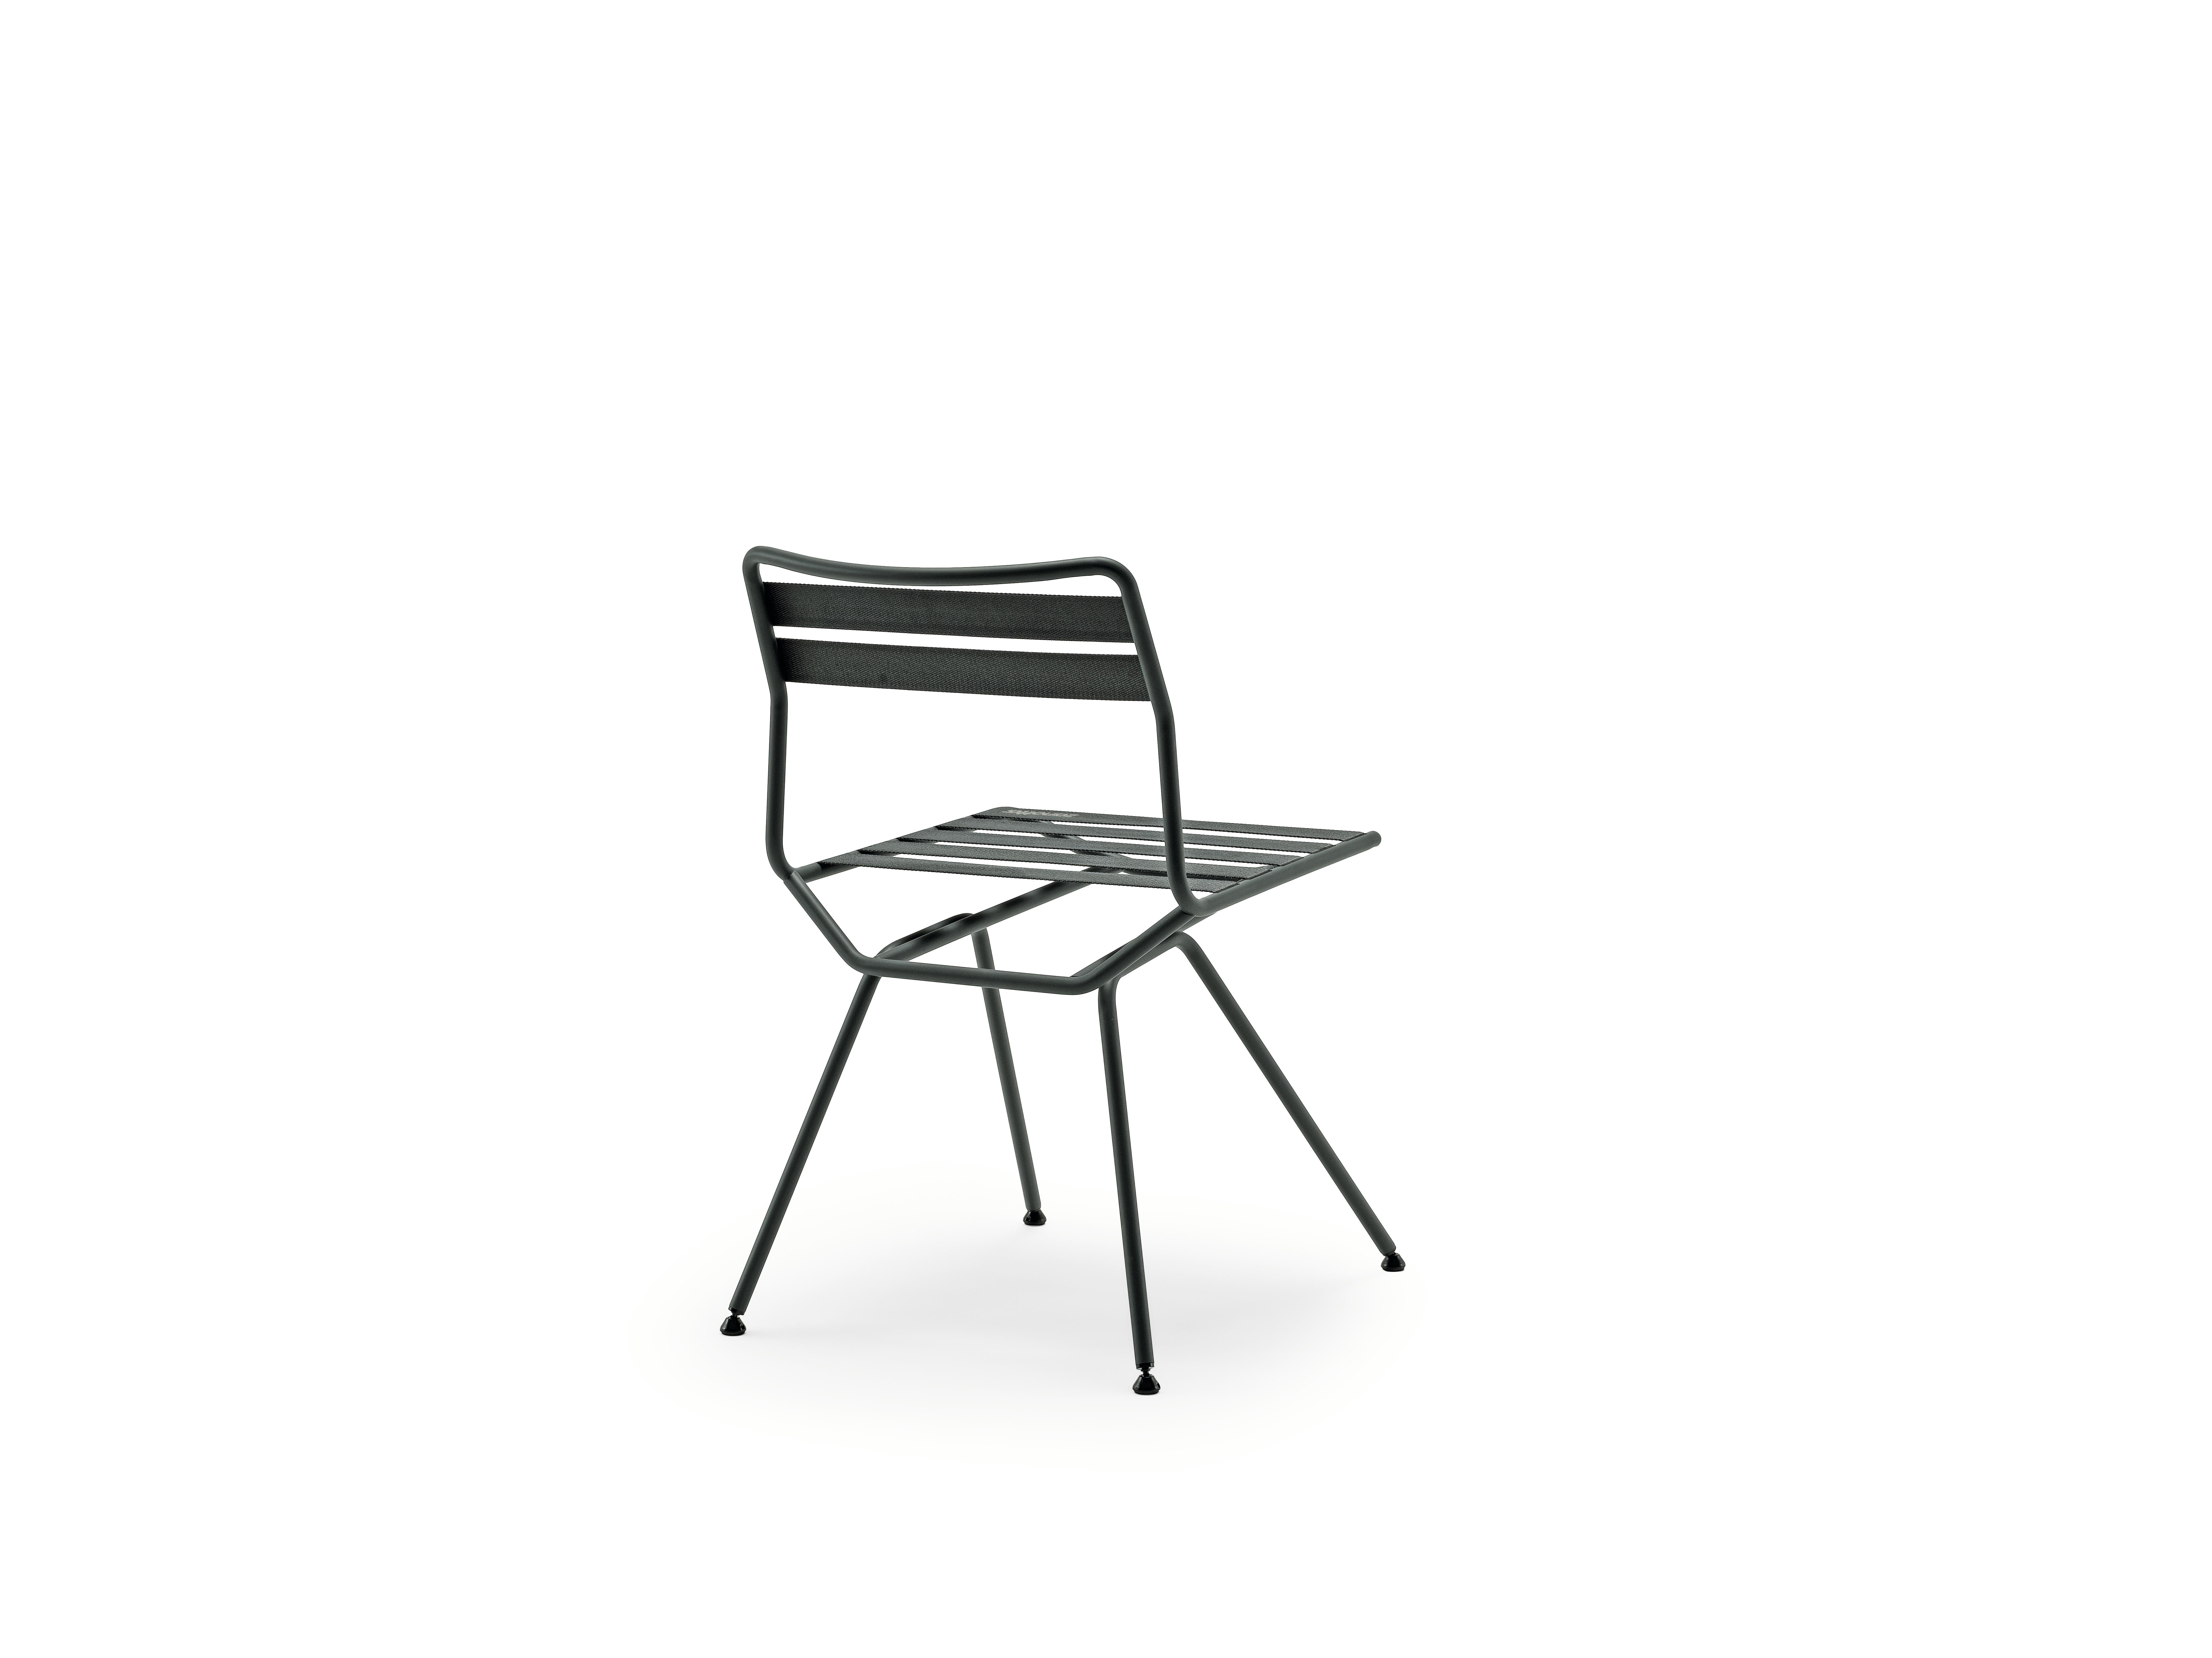 Zanotta Dan Chair in Anthracite Elastic Seat & Back with Matt Black Steel Frame by Patrick Norguet

Steel frame varnished iron grey or matt black. Seat and backrest made of elastic straps in polyester thread available in yellow, string, anthracite